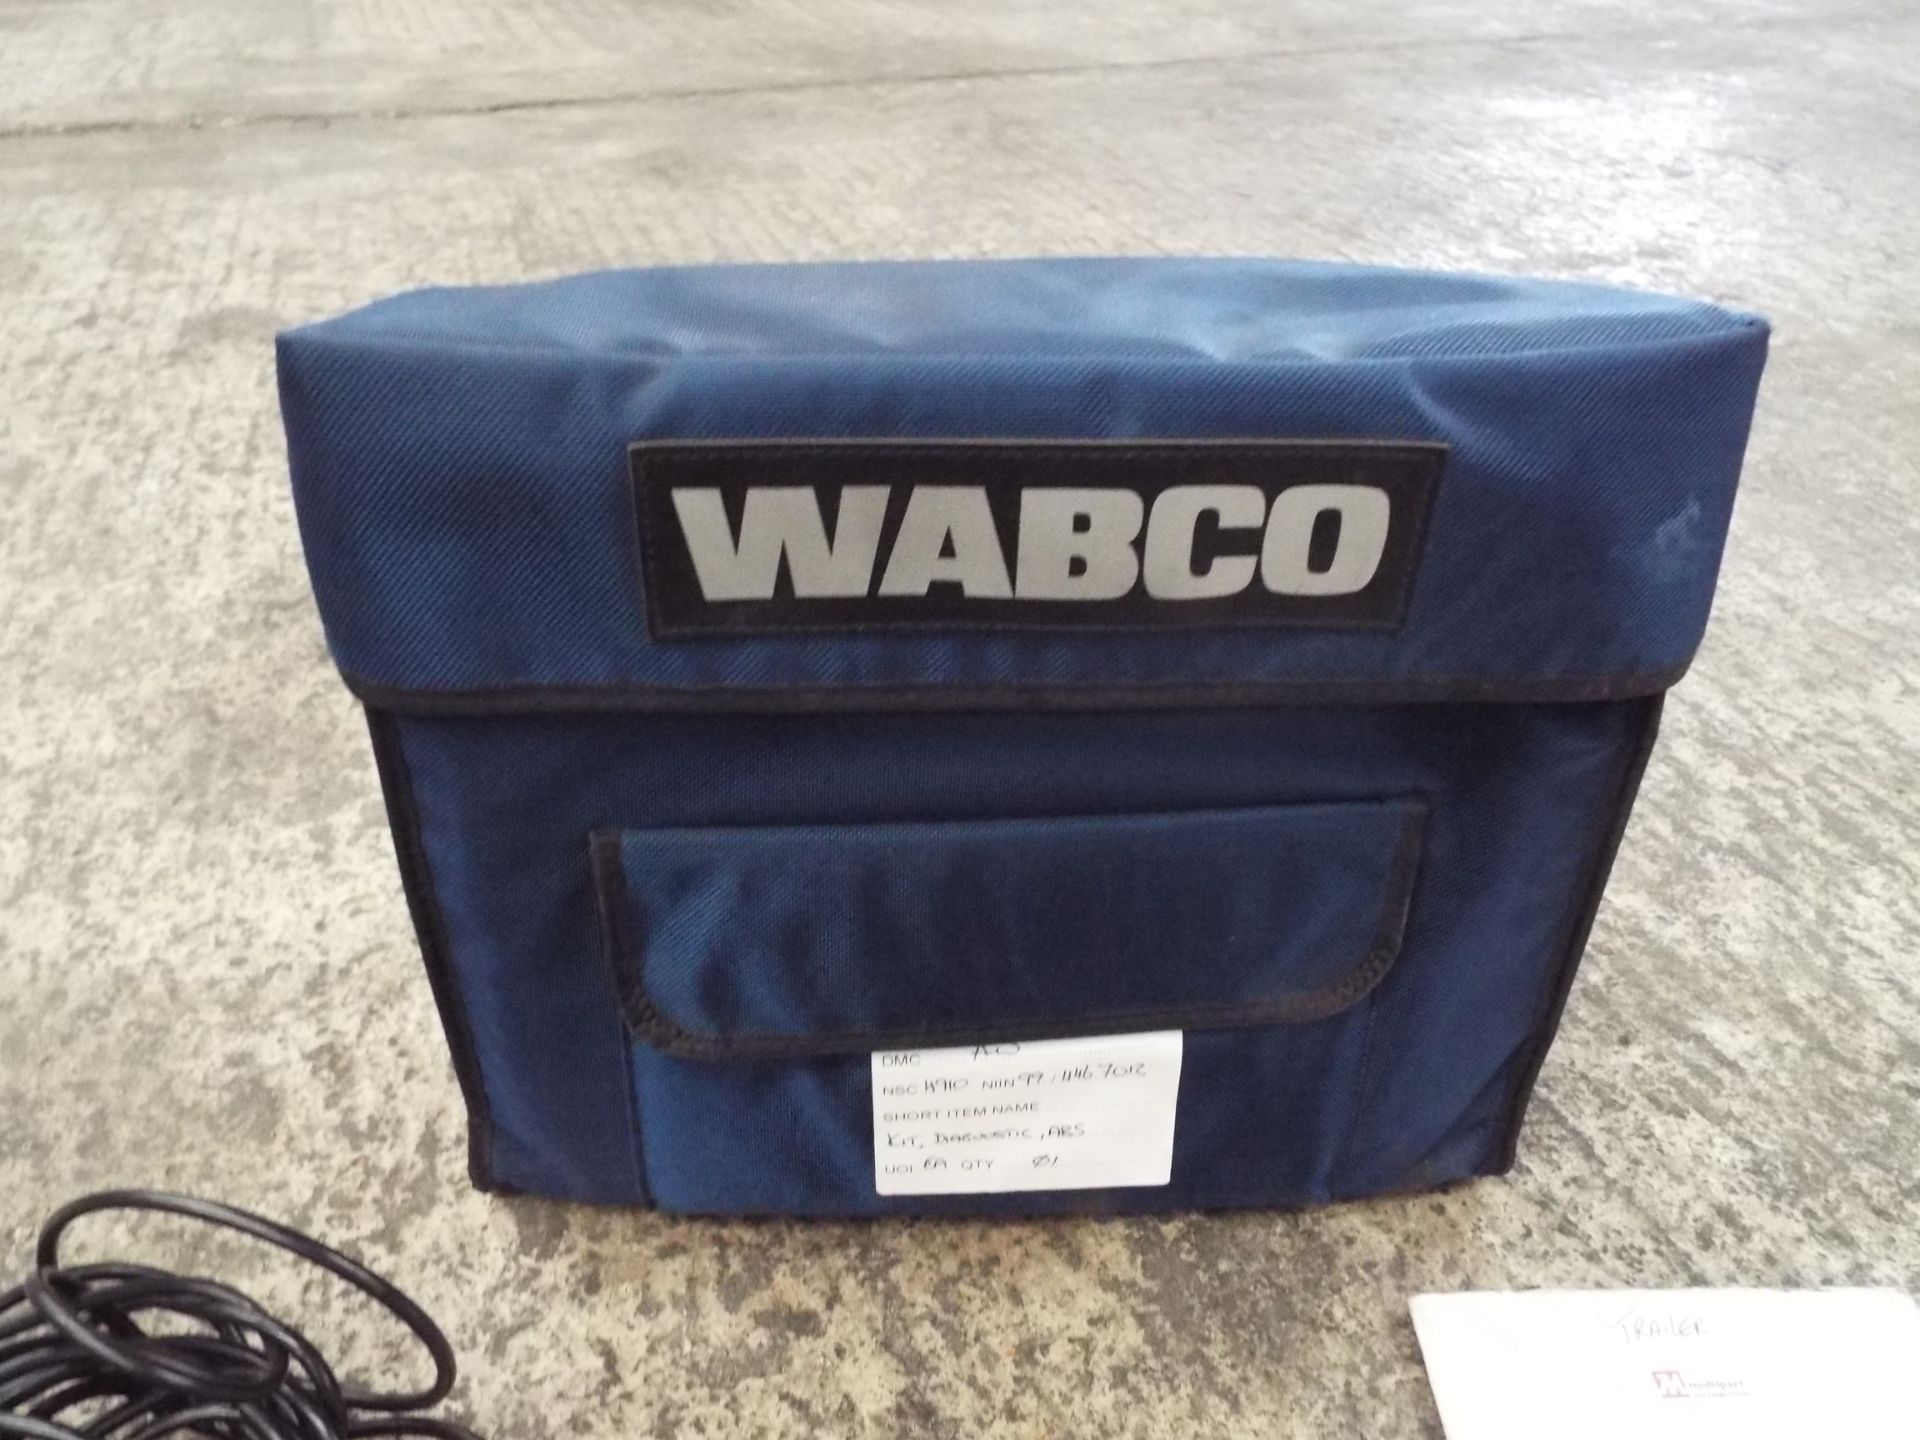 Wabco ABS Diagnostic Kit - Image 6 of 6